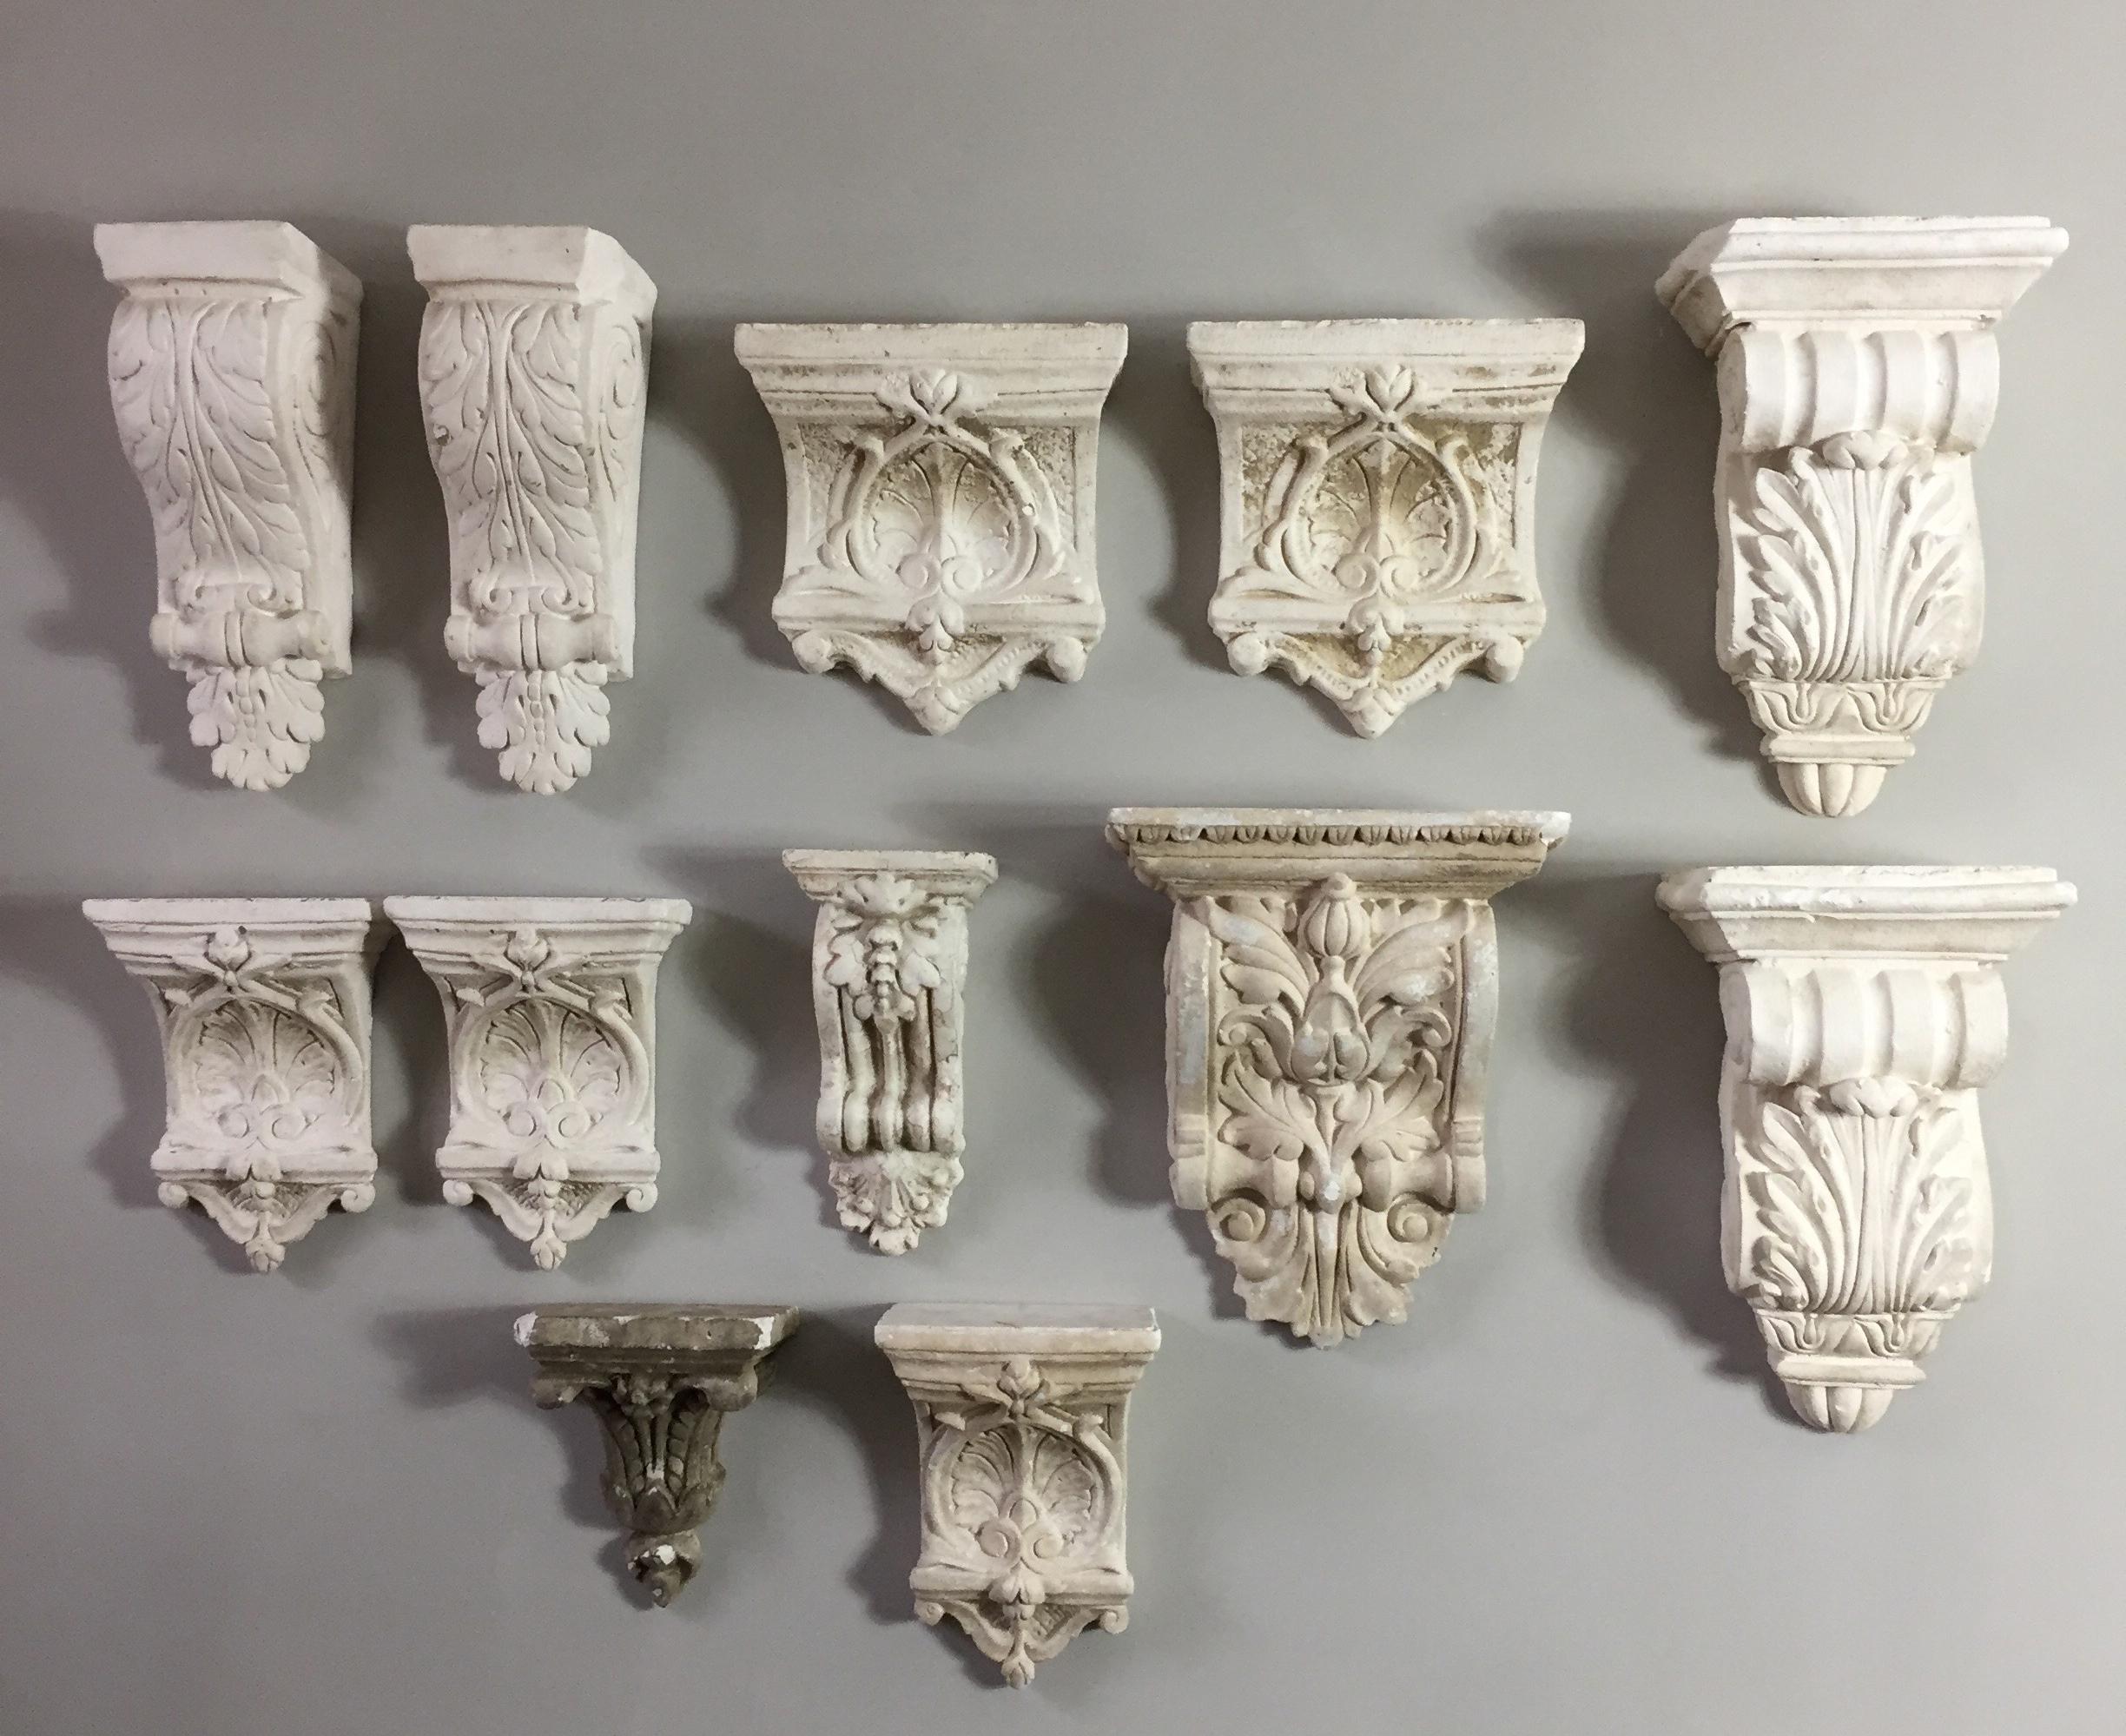 A decorative collection of 12 plaster corbels.

There are four pairs and four individual examples, with some light loss or age related chipping but nothing that detracts.

Varying sizes and shapes ranging in height from 22cm for the smallest up